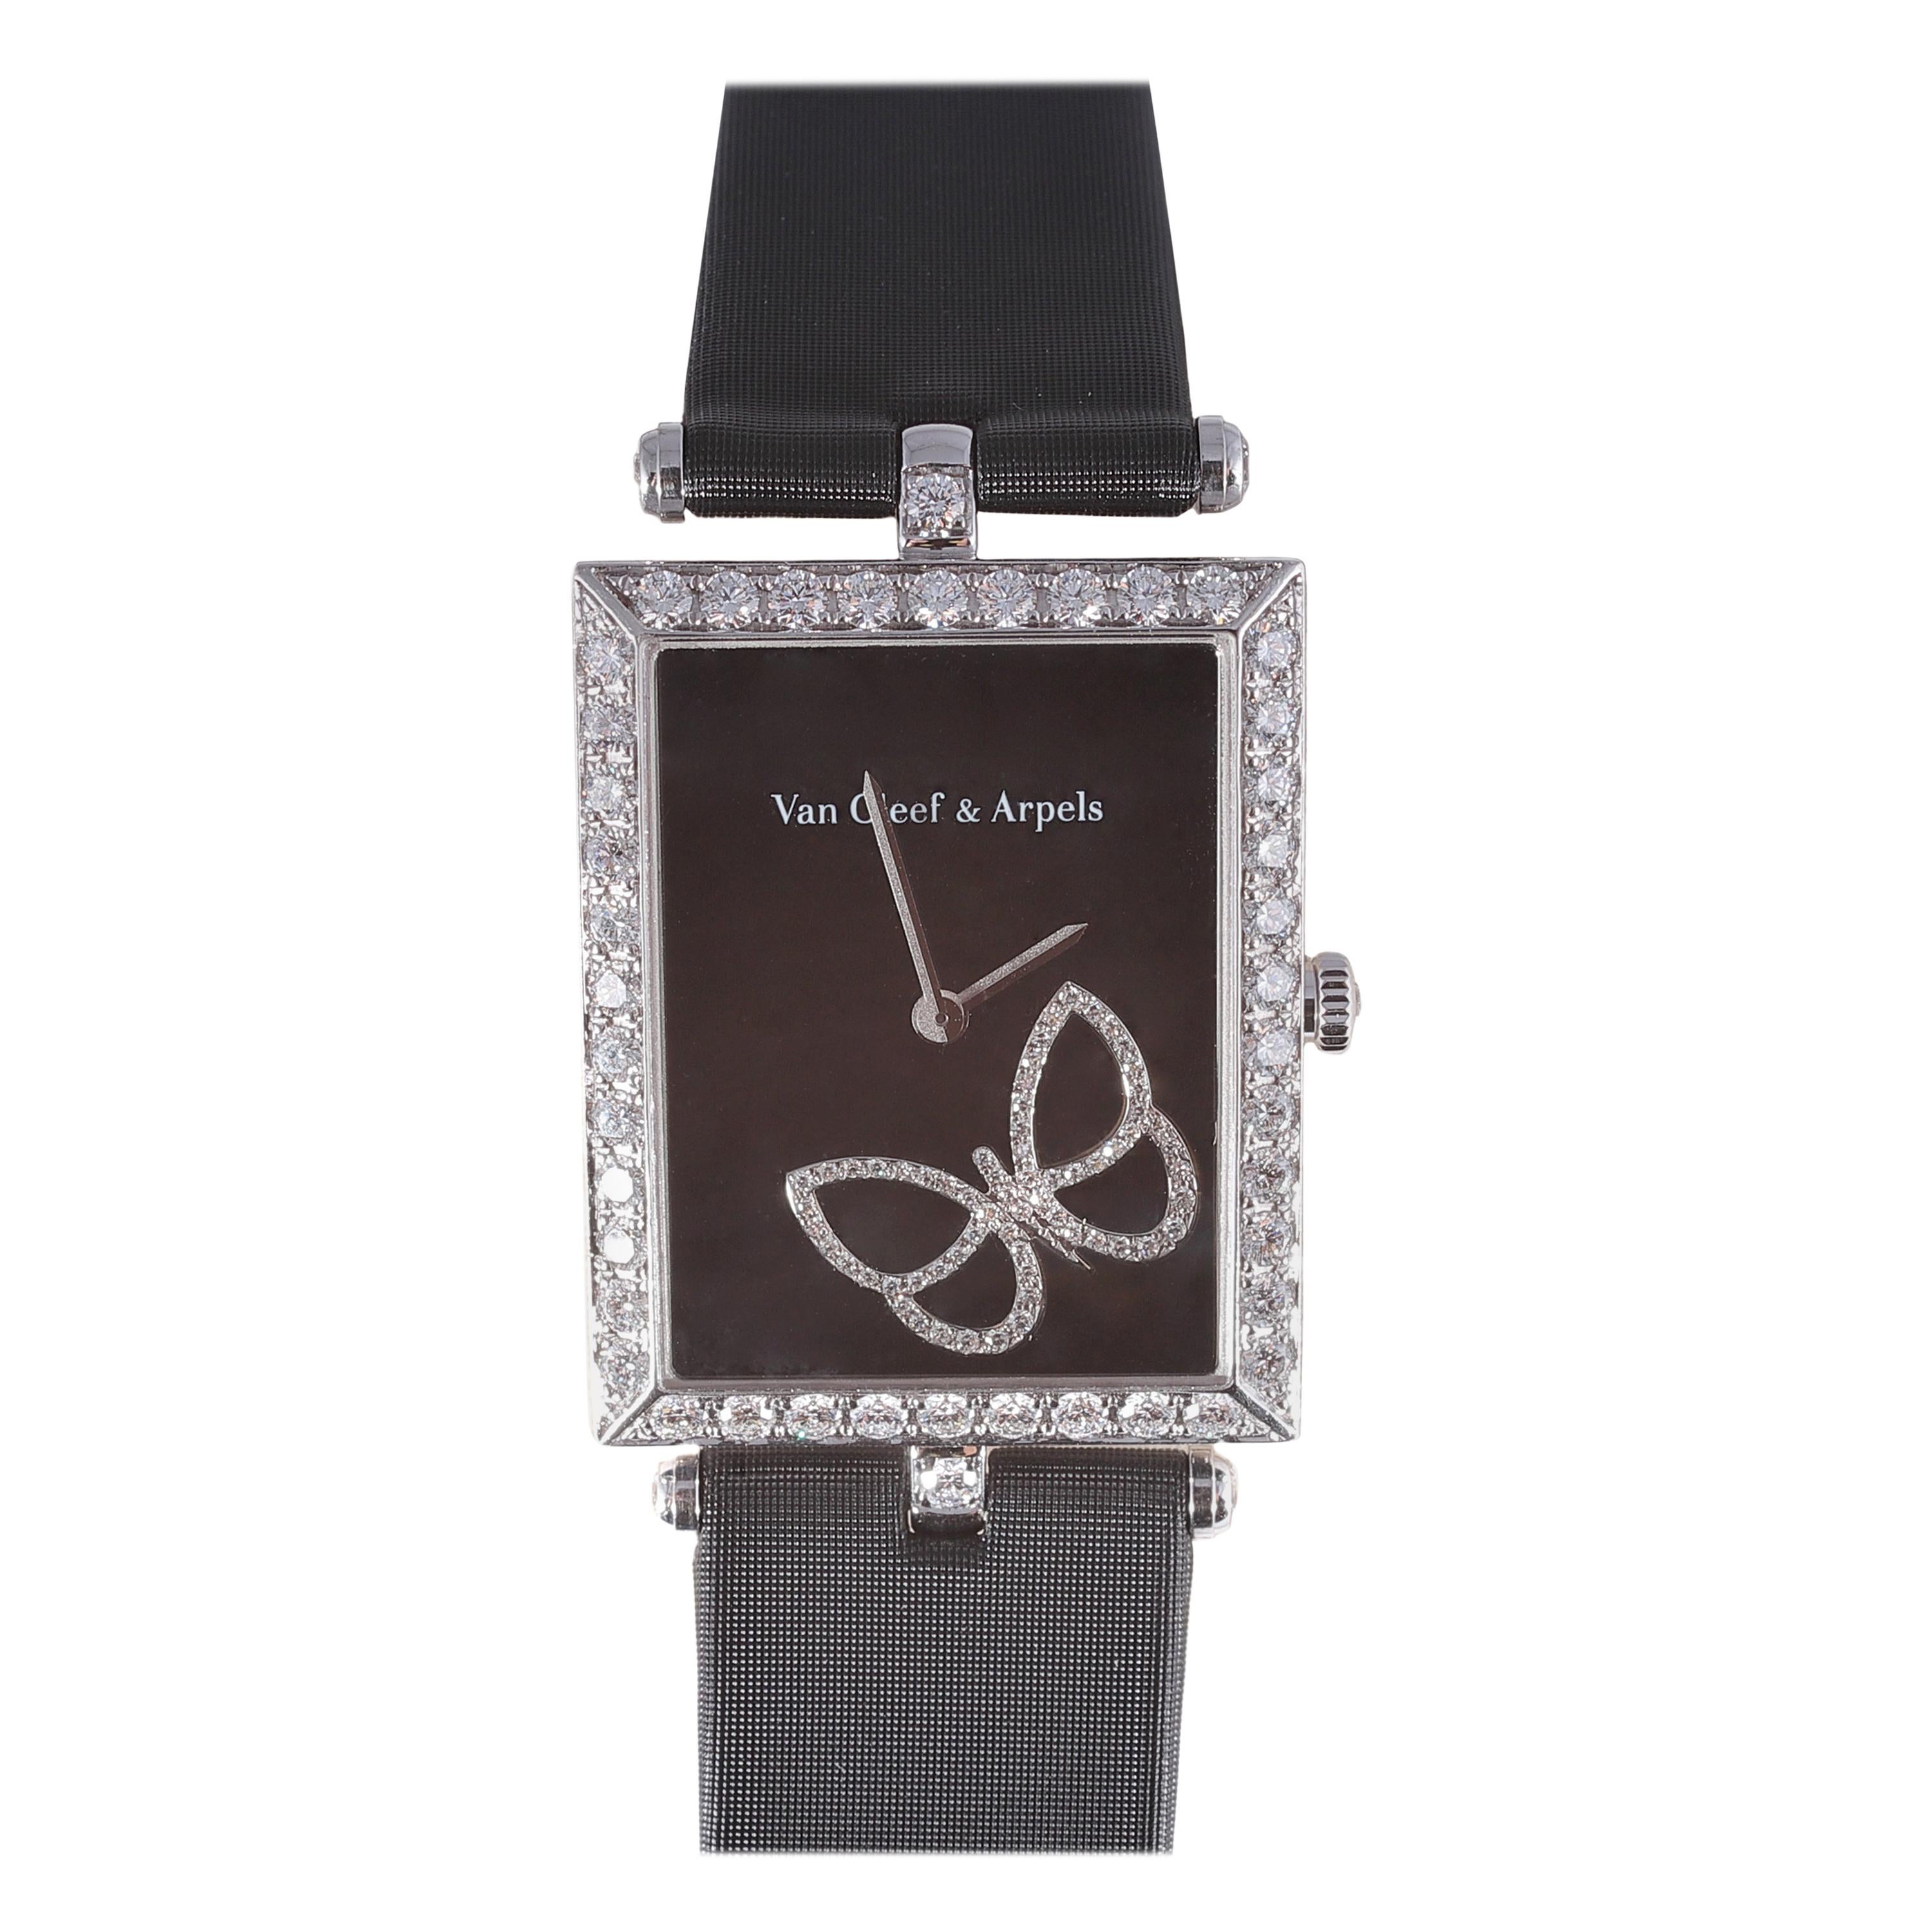 Limited Edition Van Cleef & Arpels Lady Papillon Diamond White Gold Watch